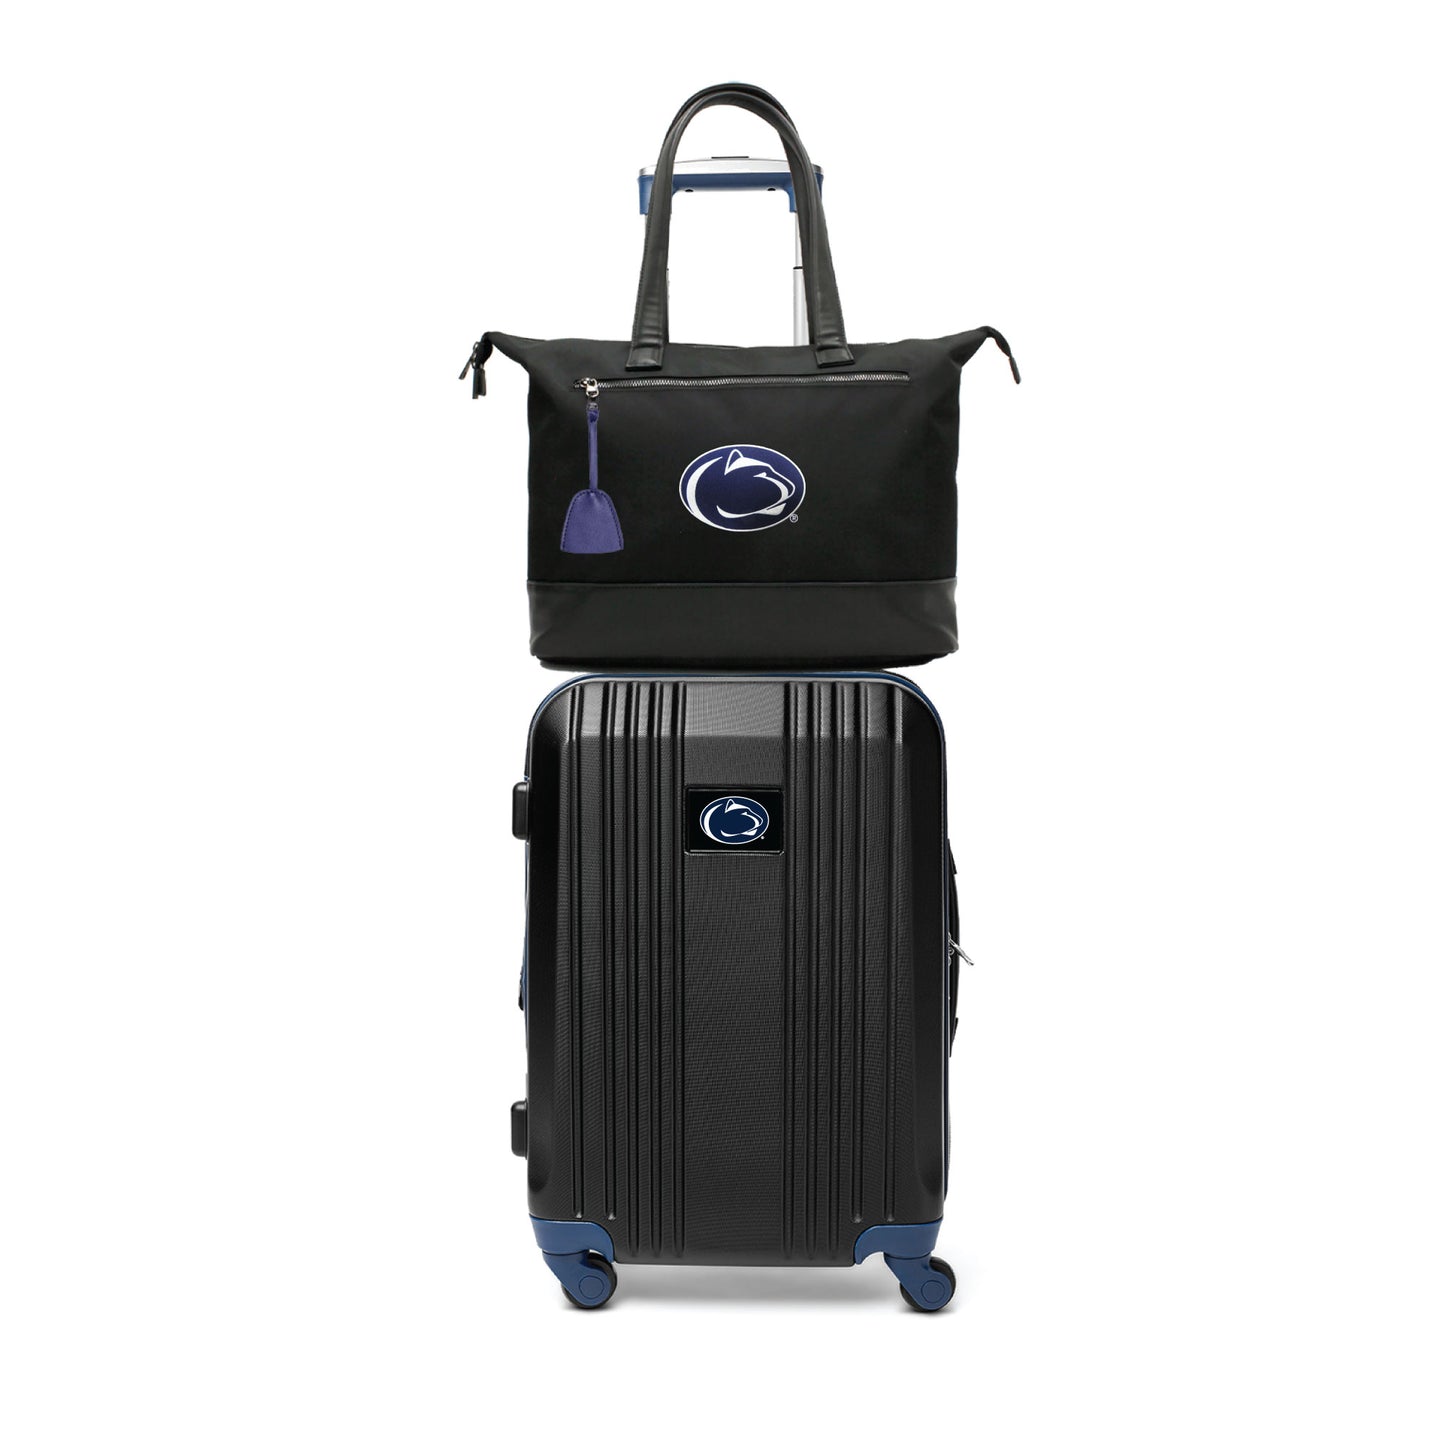 Penn State Nittany Lions Premium Laptop Tote Bag and Luggage Set